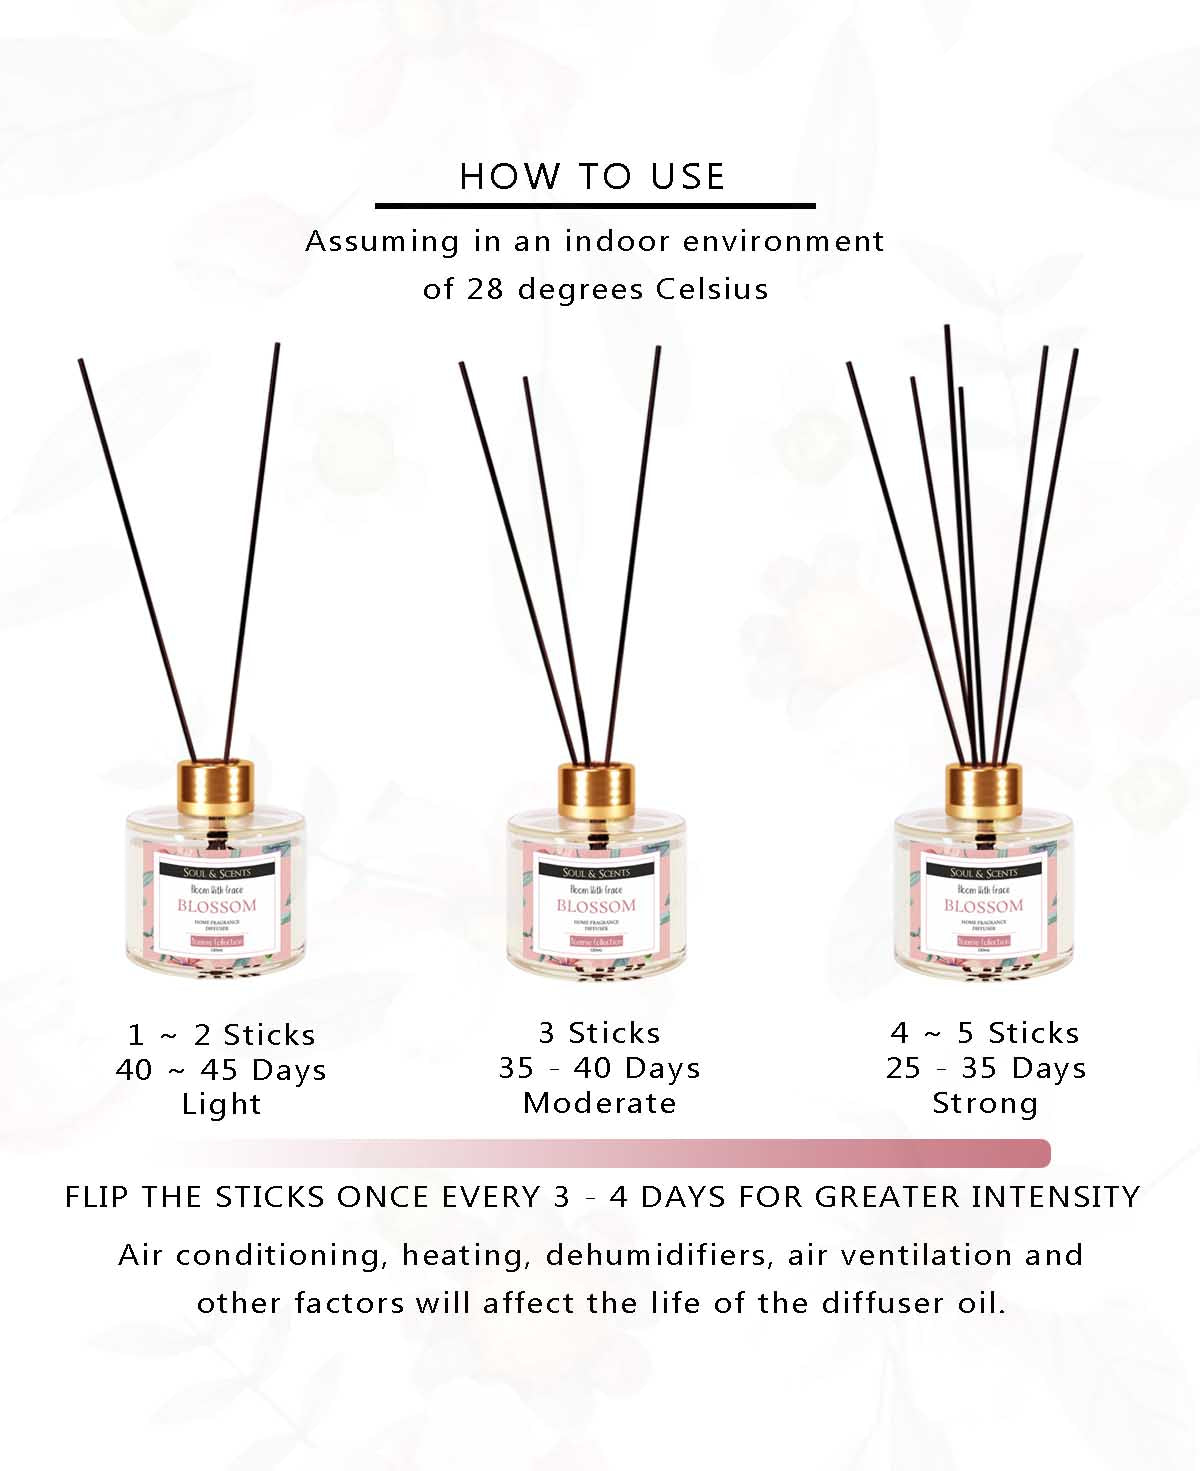 Blossom Reed Diffuser